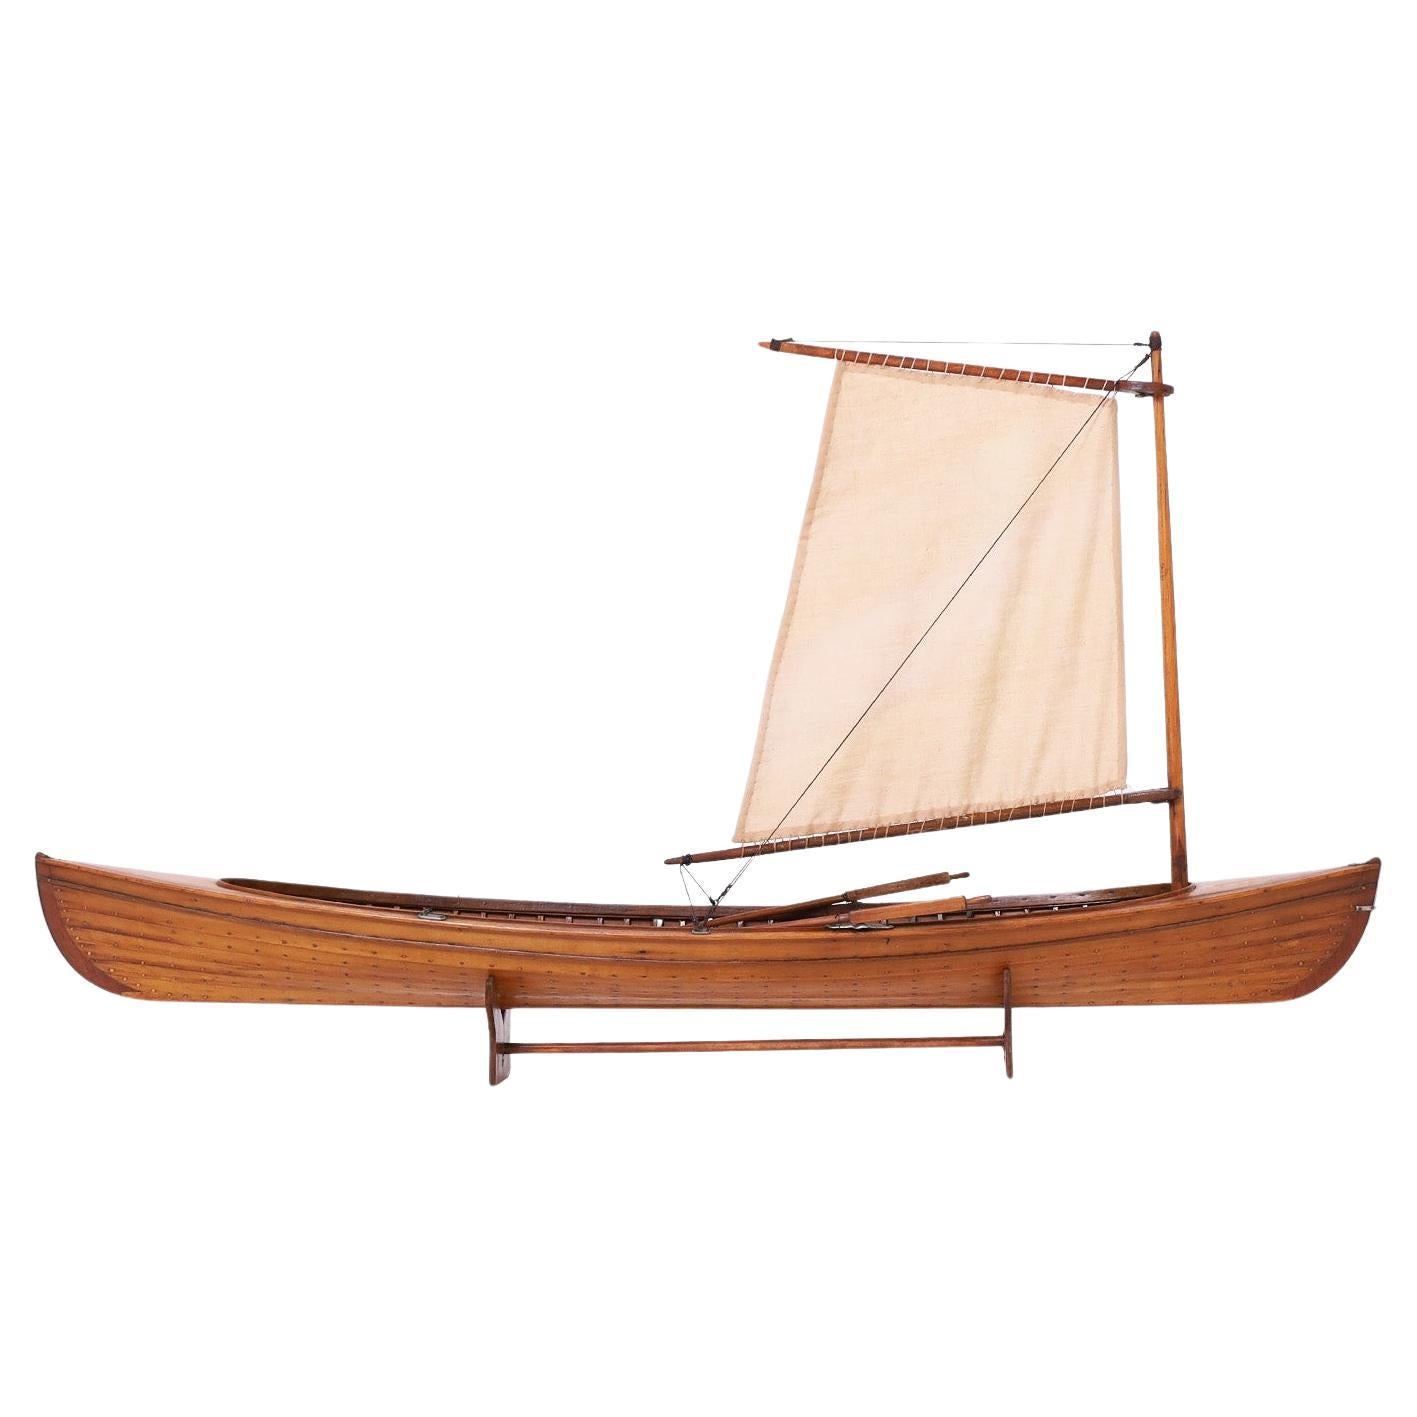 Antique English Wooden Skiff Model For Sale